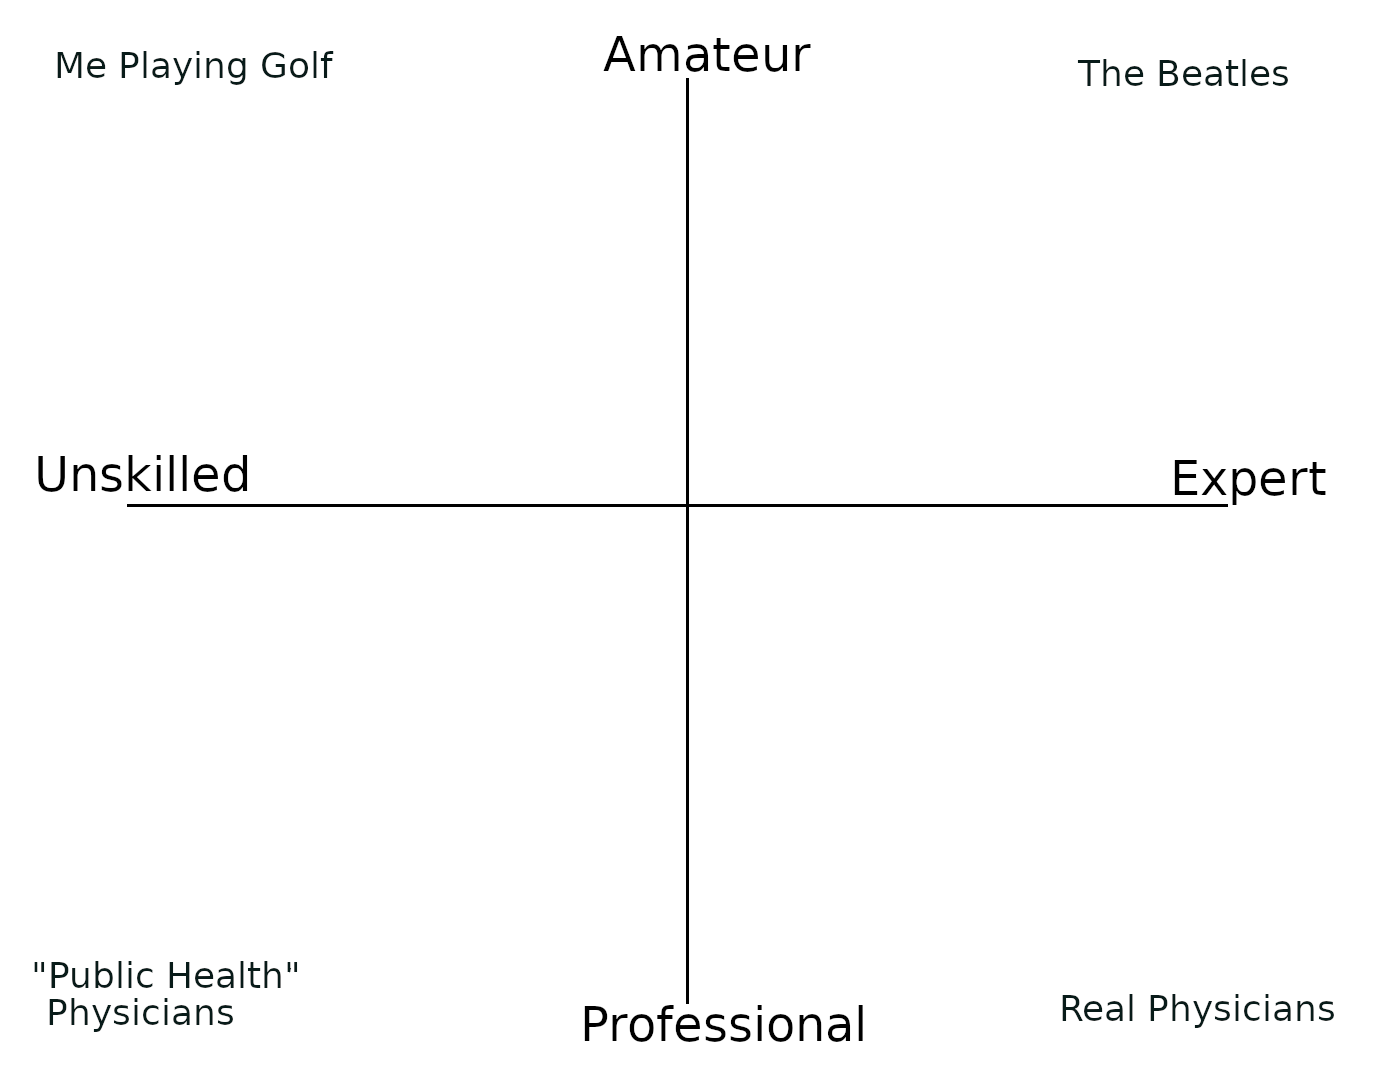 Crossed axes labled "Unskilled" to "Expert" horizontally and "Professionl" to "Amateur" vertically, with "Me playing golf" in the "unskilled amateur" corner, "The Beatles" in the "expert amateur" corner, "public health physicians" in the "unskilled professional" corner and "real physicians' in the "expert professional" corner